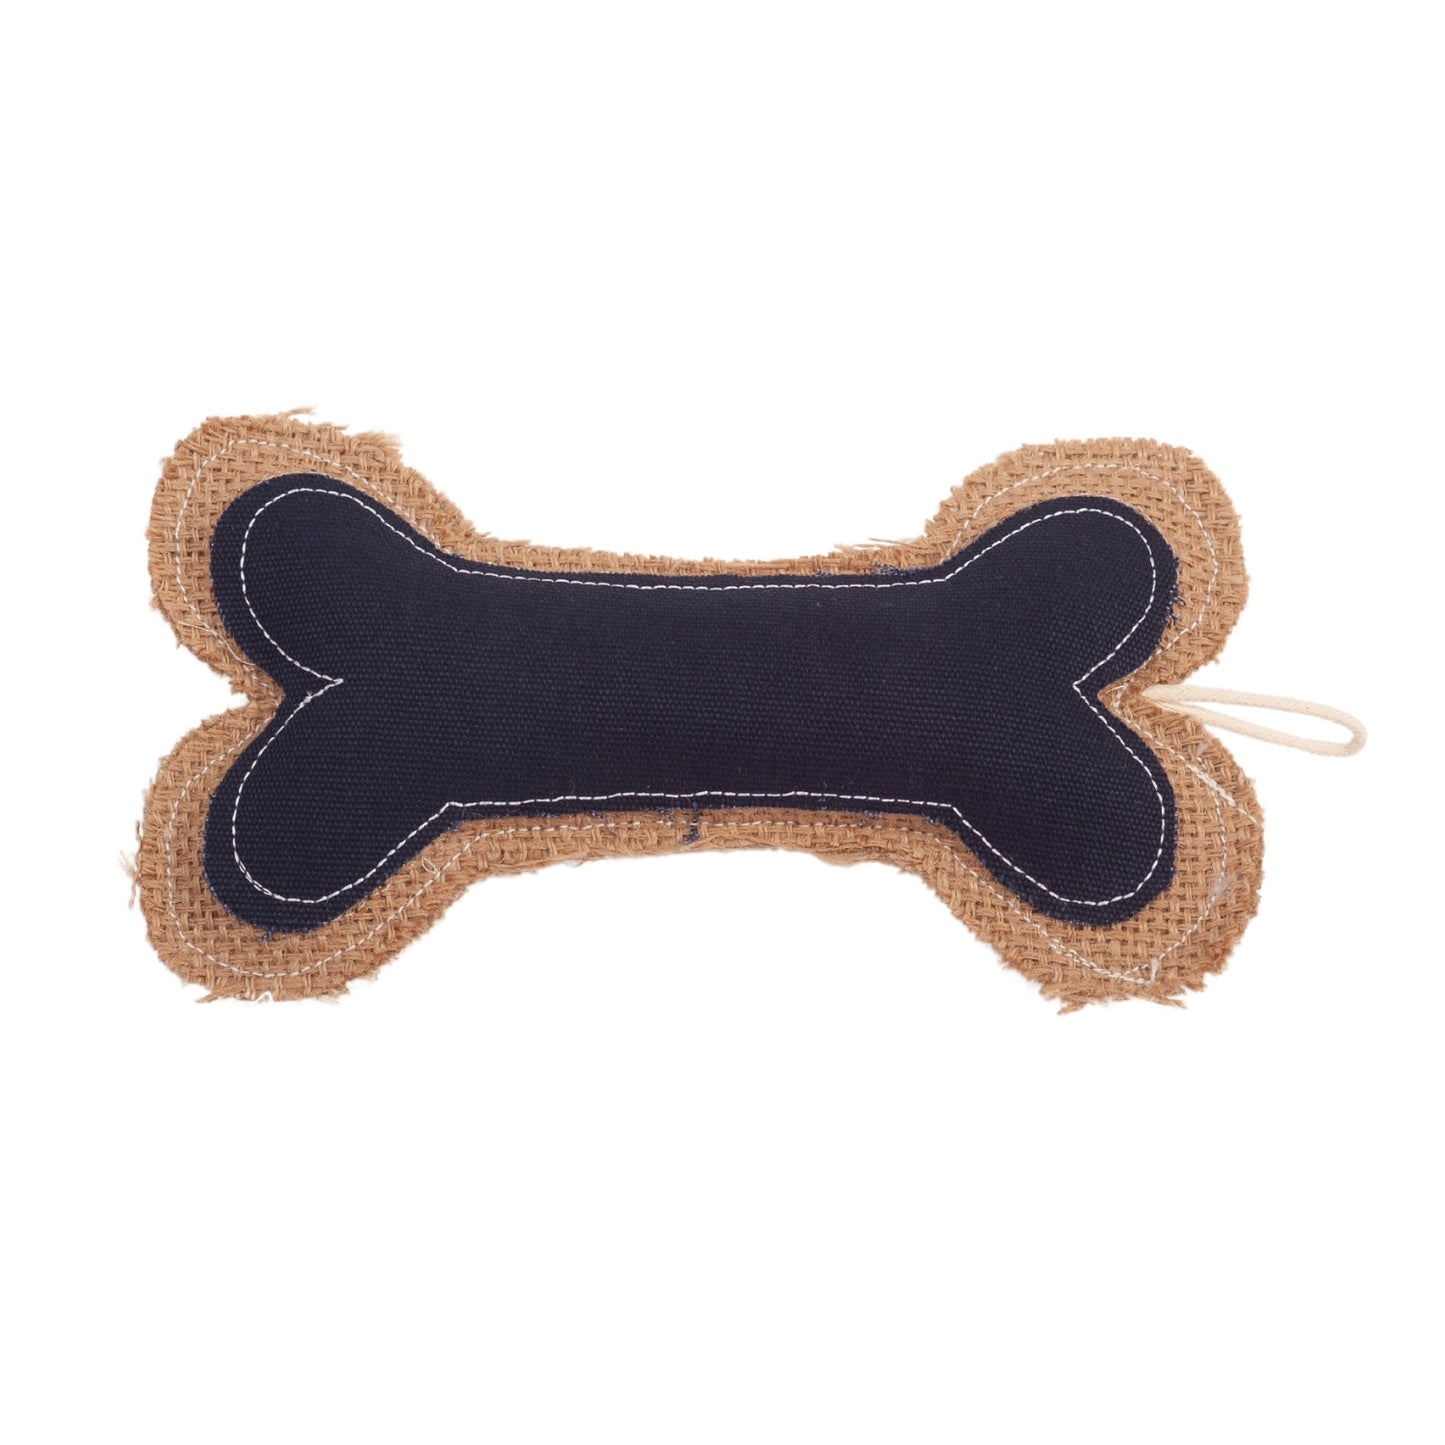 Country Living Sustainable Jean Leather-Jute Bone Pillow Dog Chew Toy